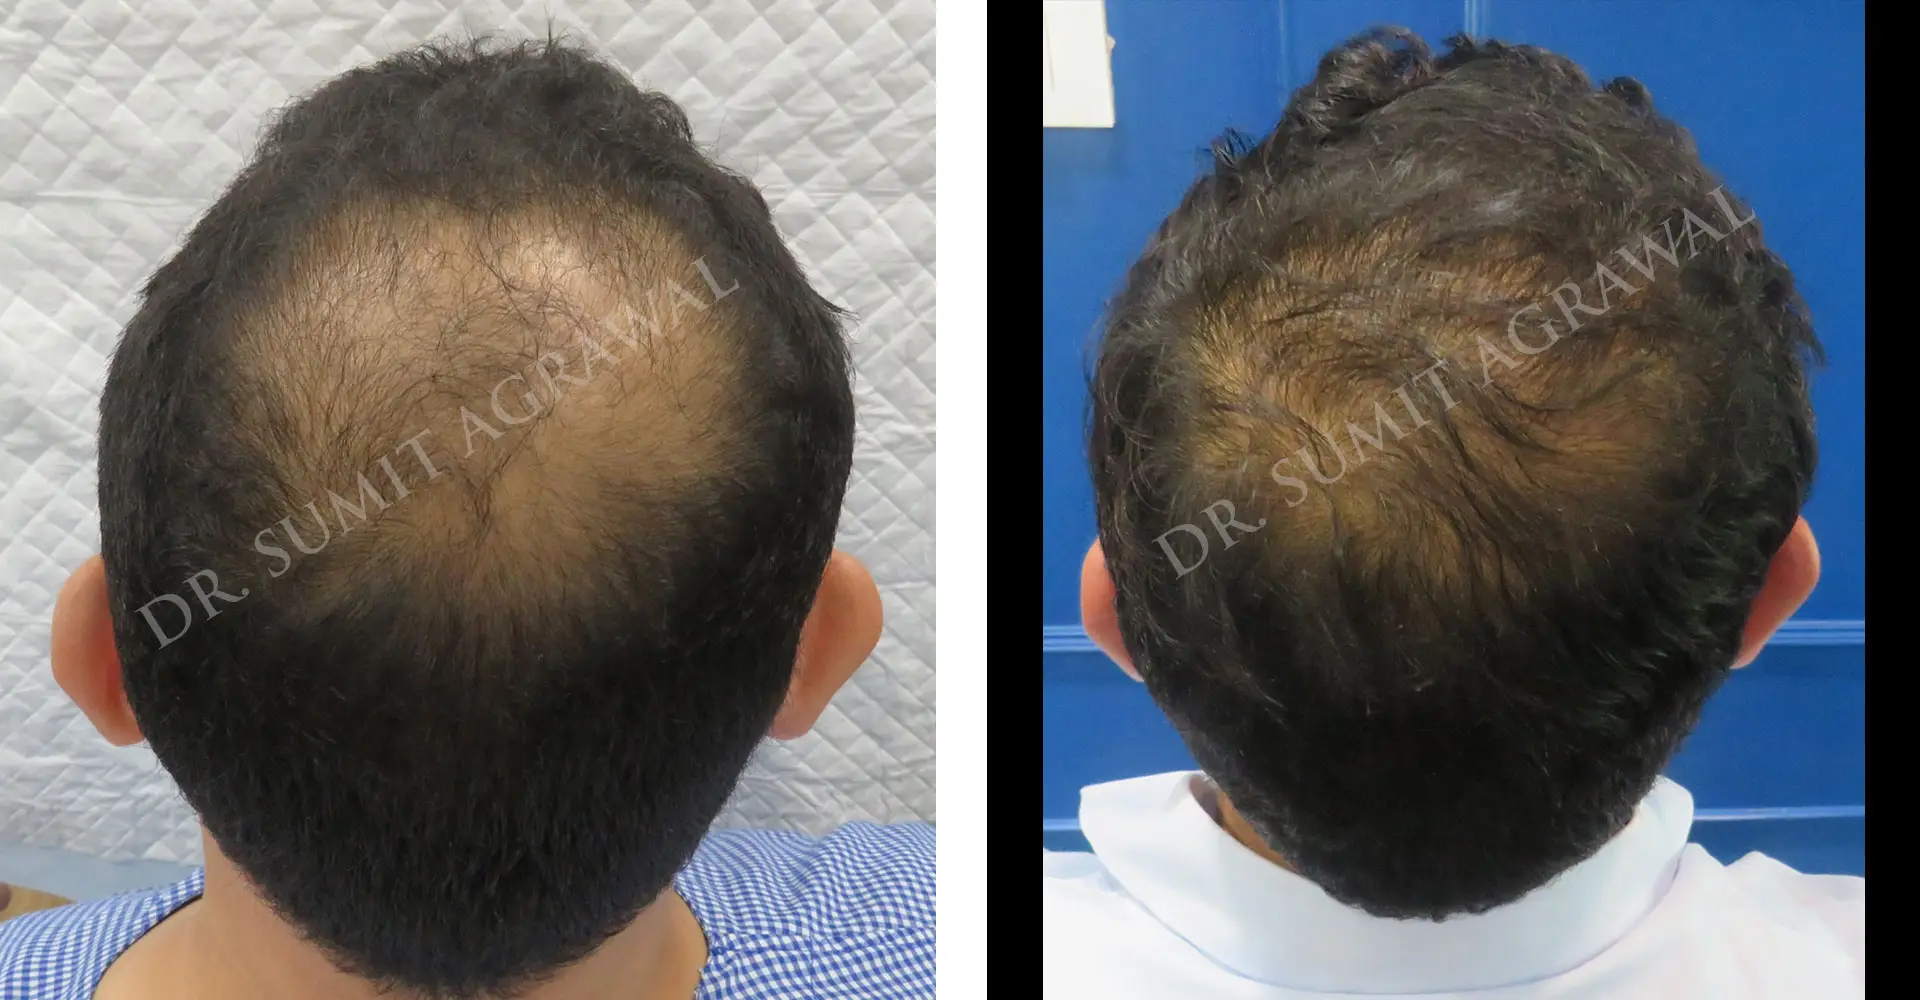 View Vertex (crown) Hair Transplant Before and After photos of successful results by Dr. Sumit Agrawal.